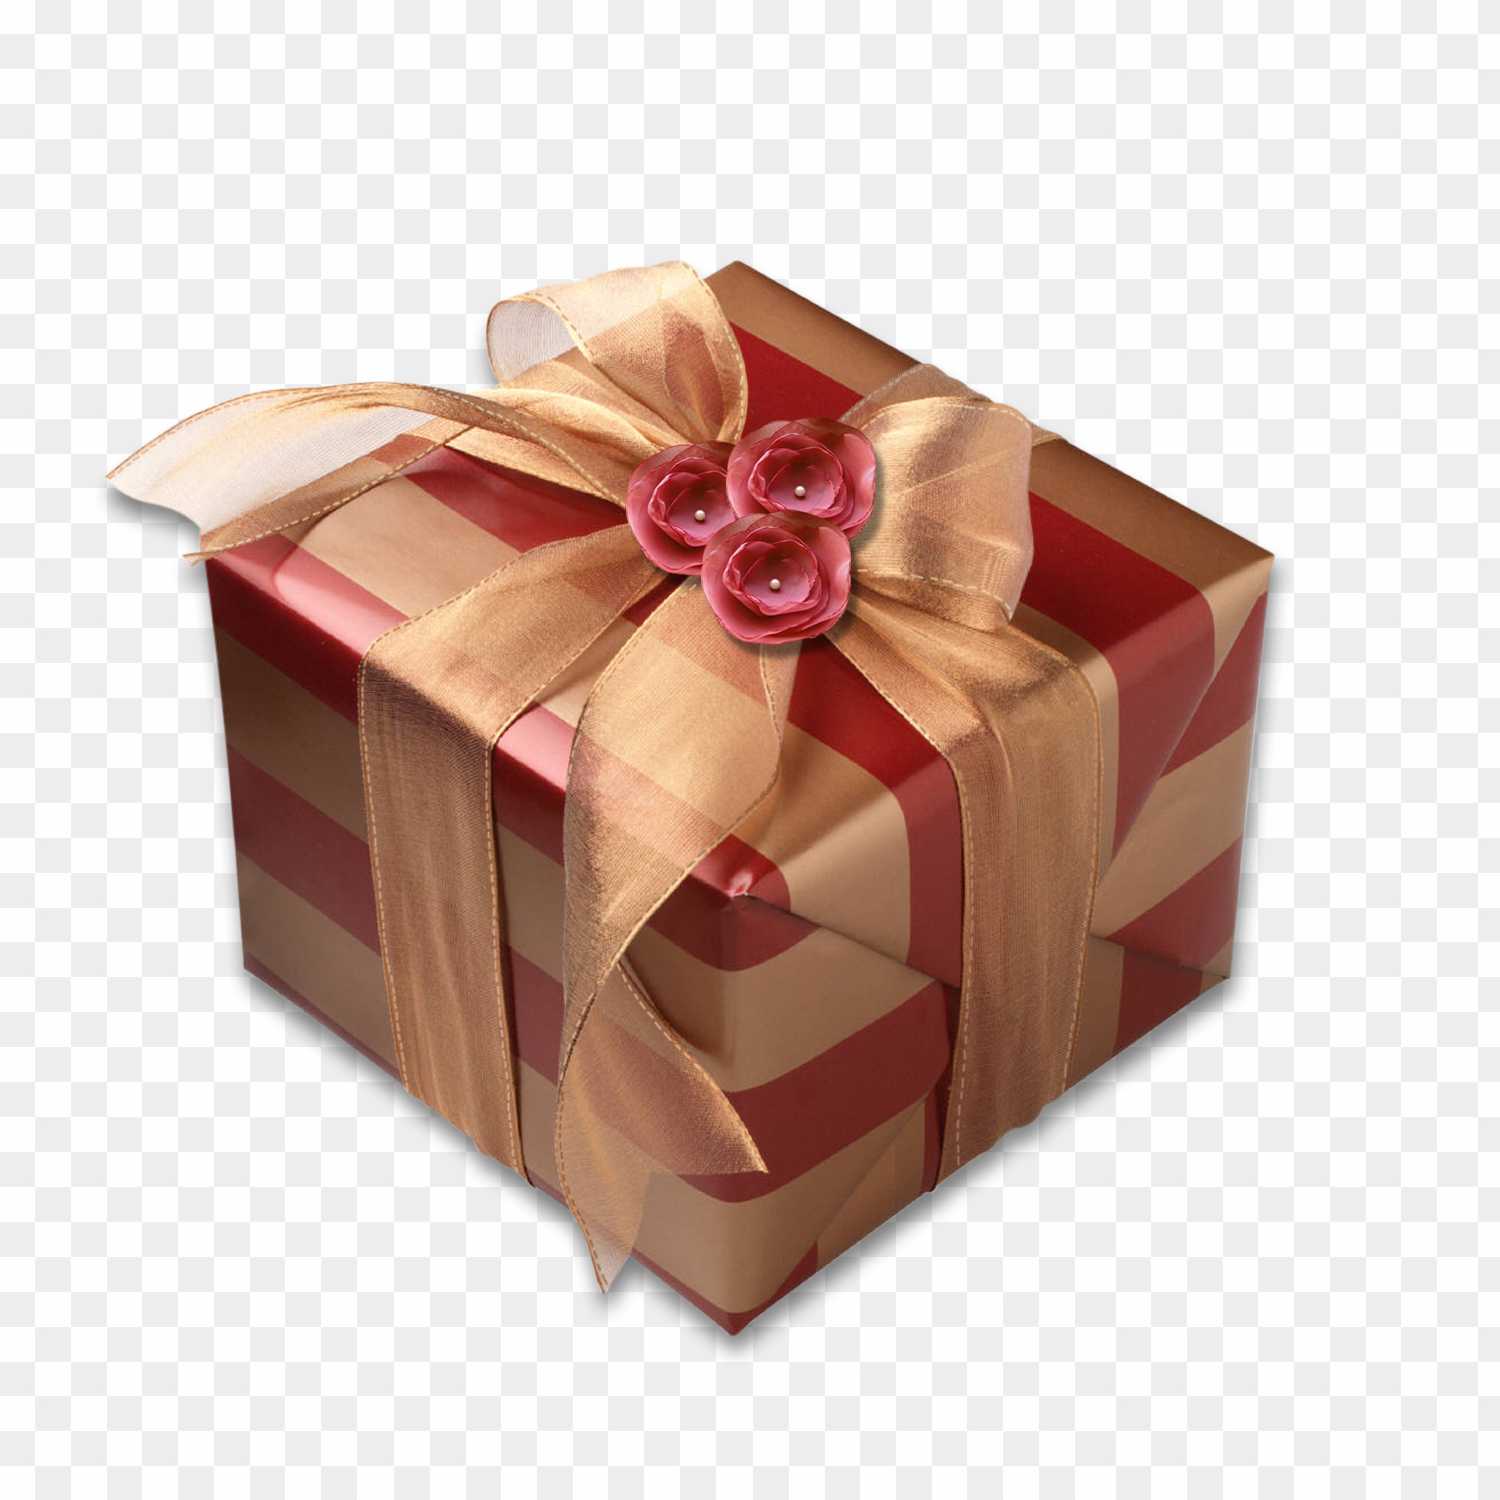 Gifts png download